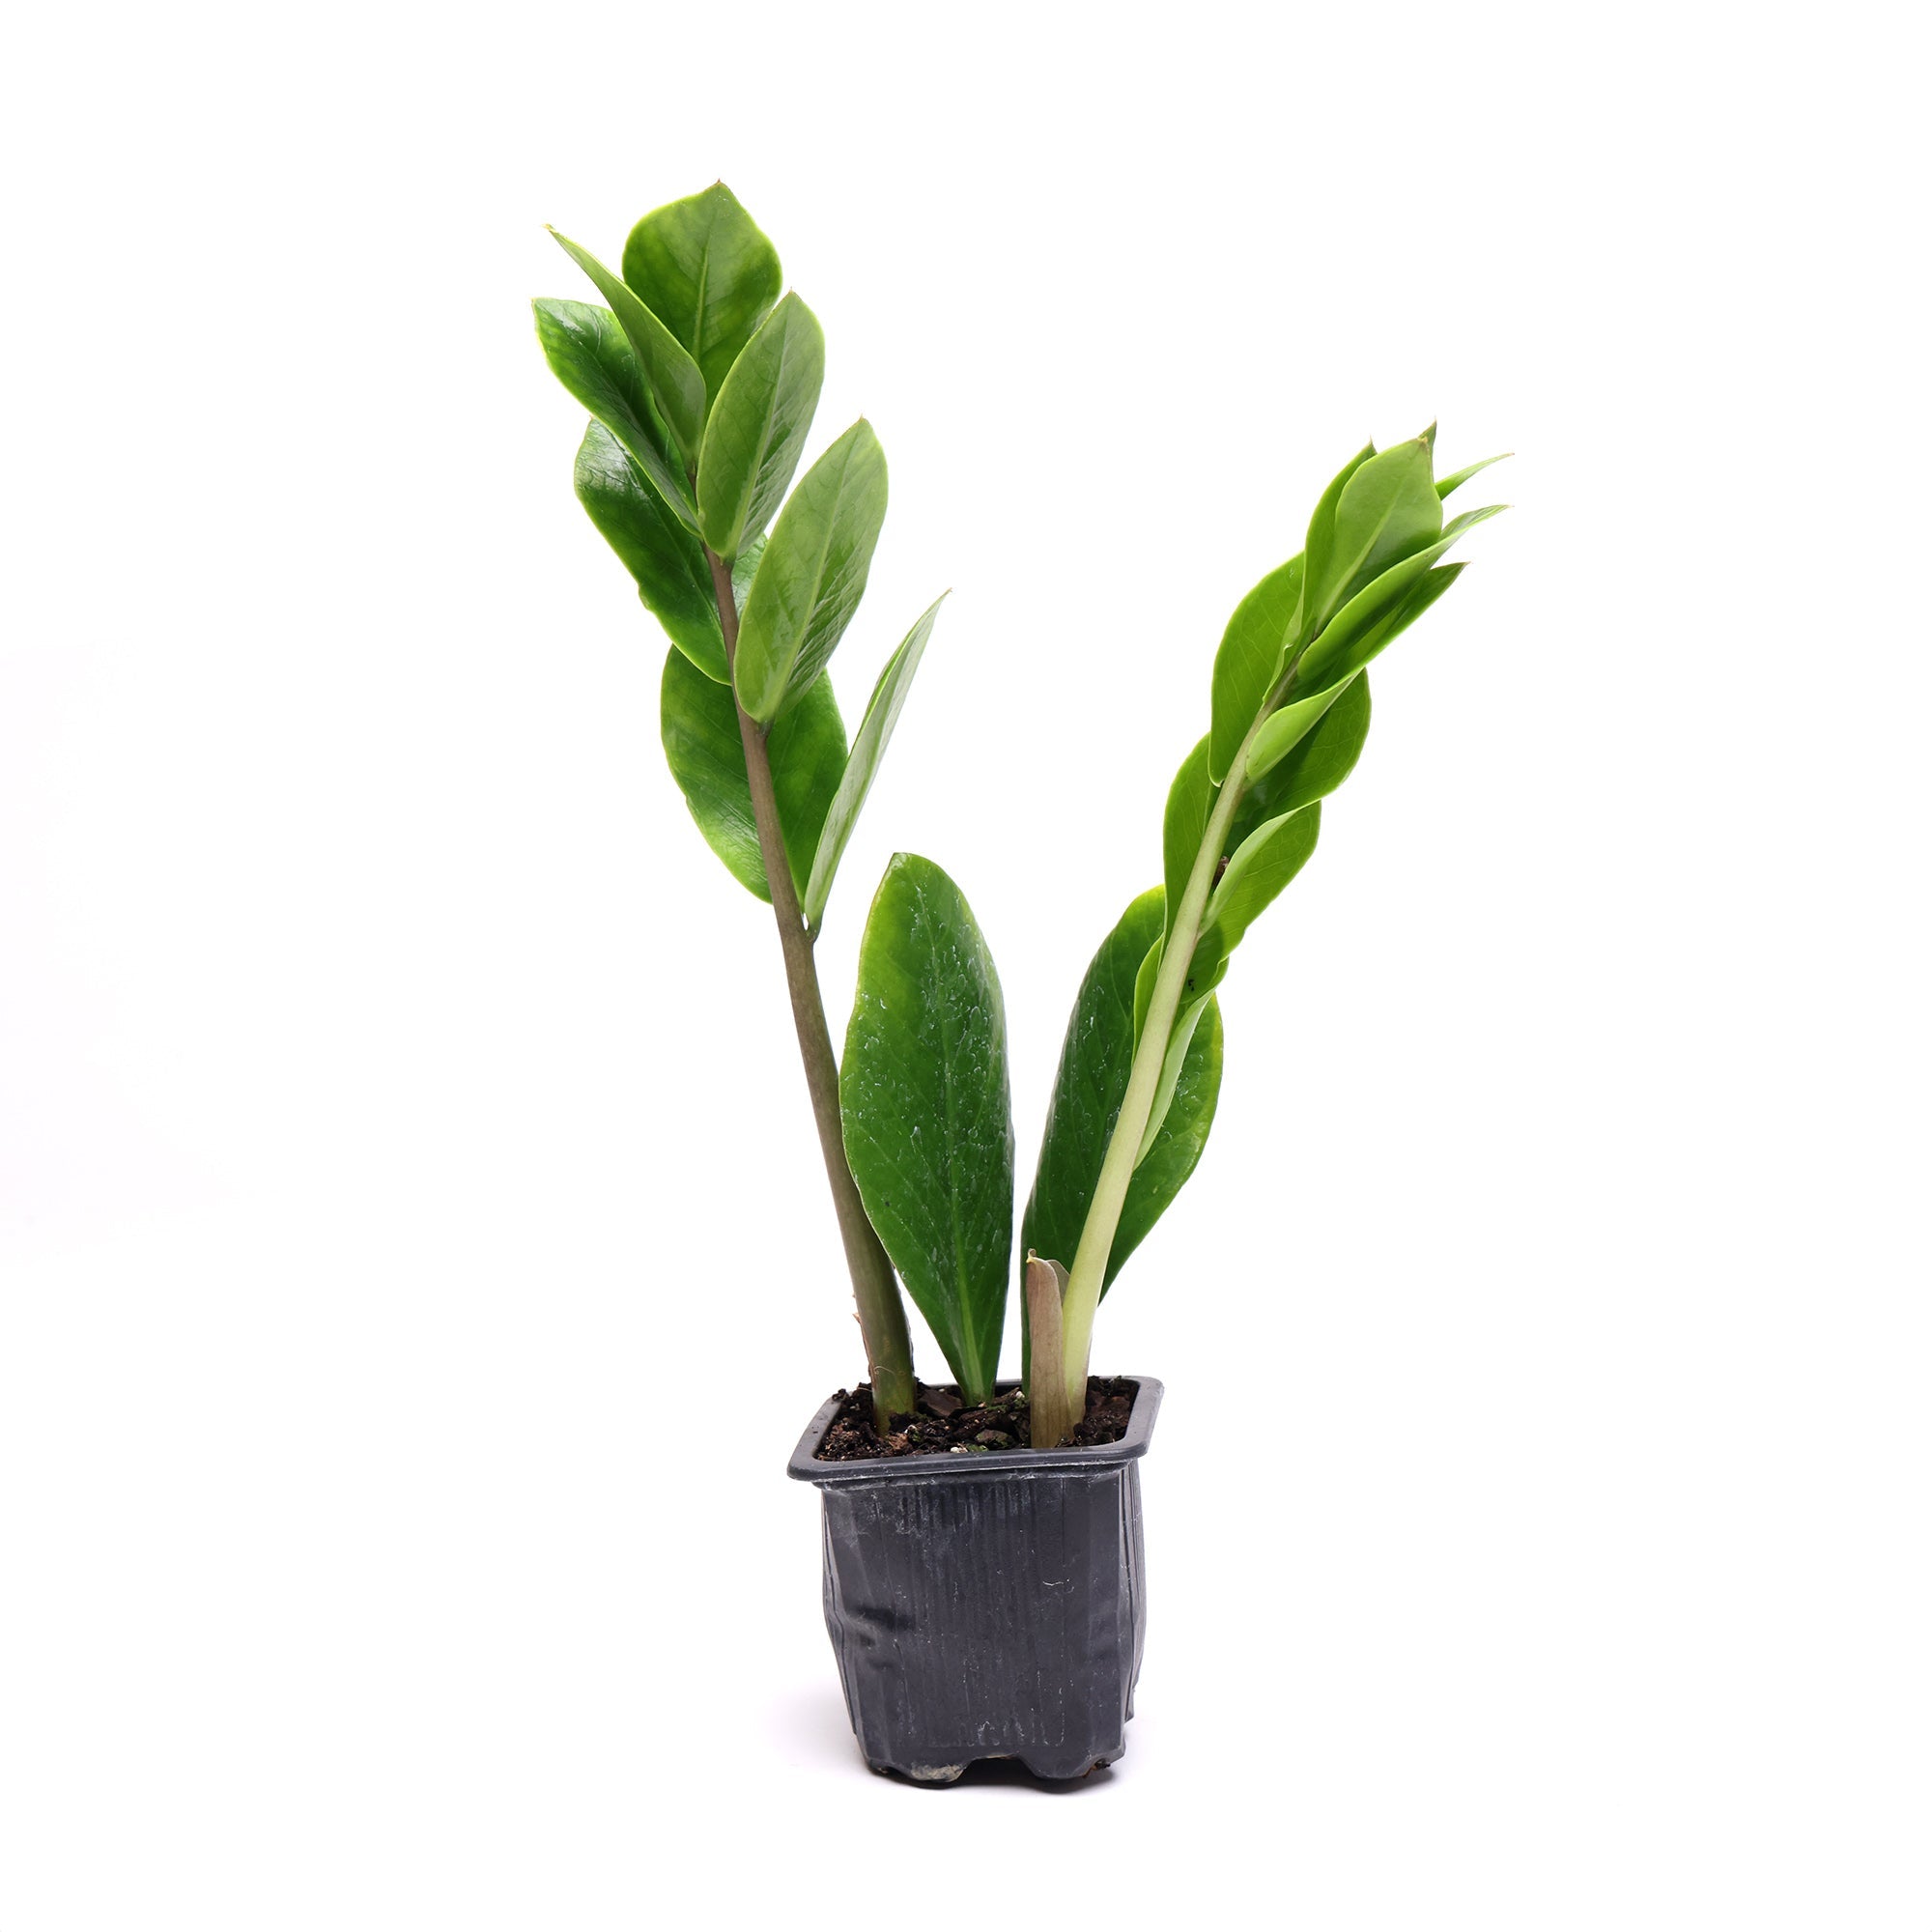 A small Zamioculcas Zamiifolia 3 Inches plant, commonly known as zz plant, with glossy green leaves, potted in a black plastic container against a white background. By Chive Studio.